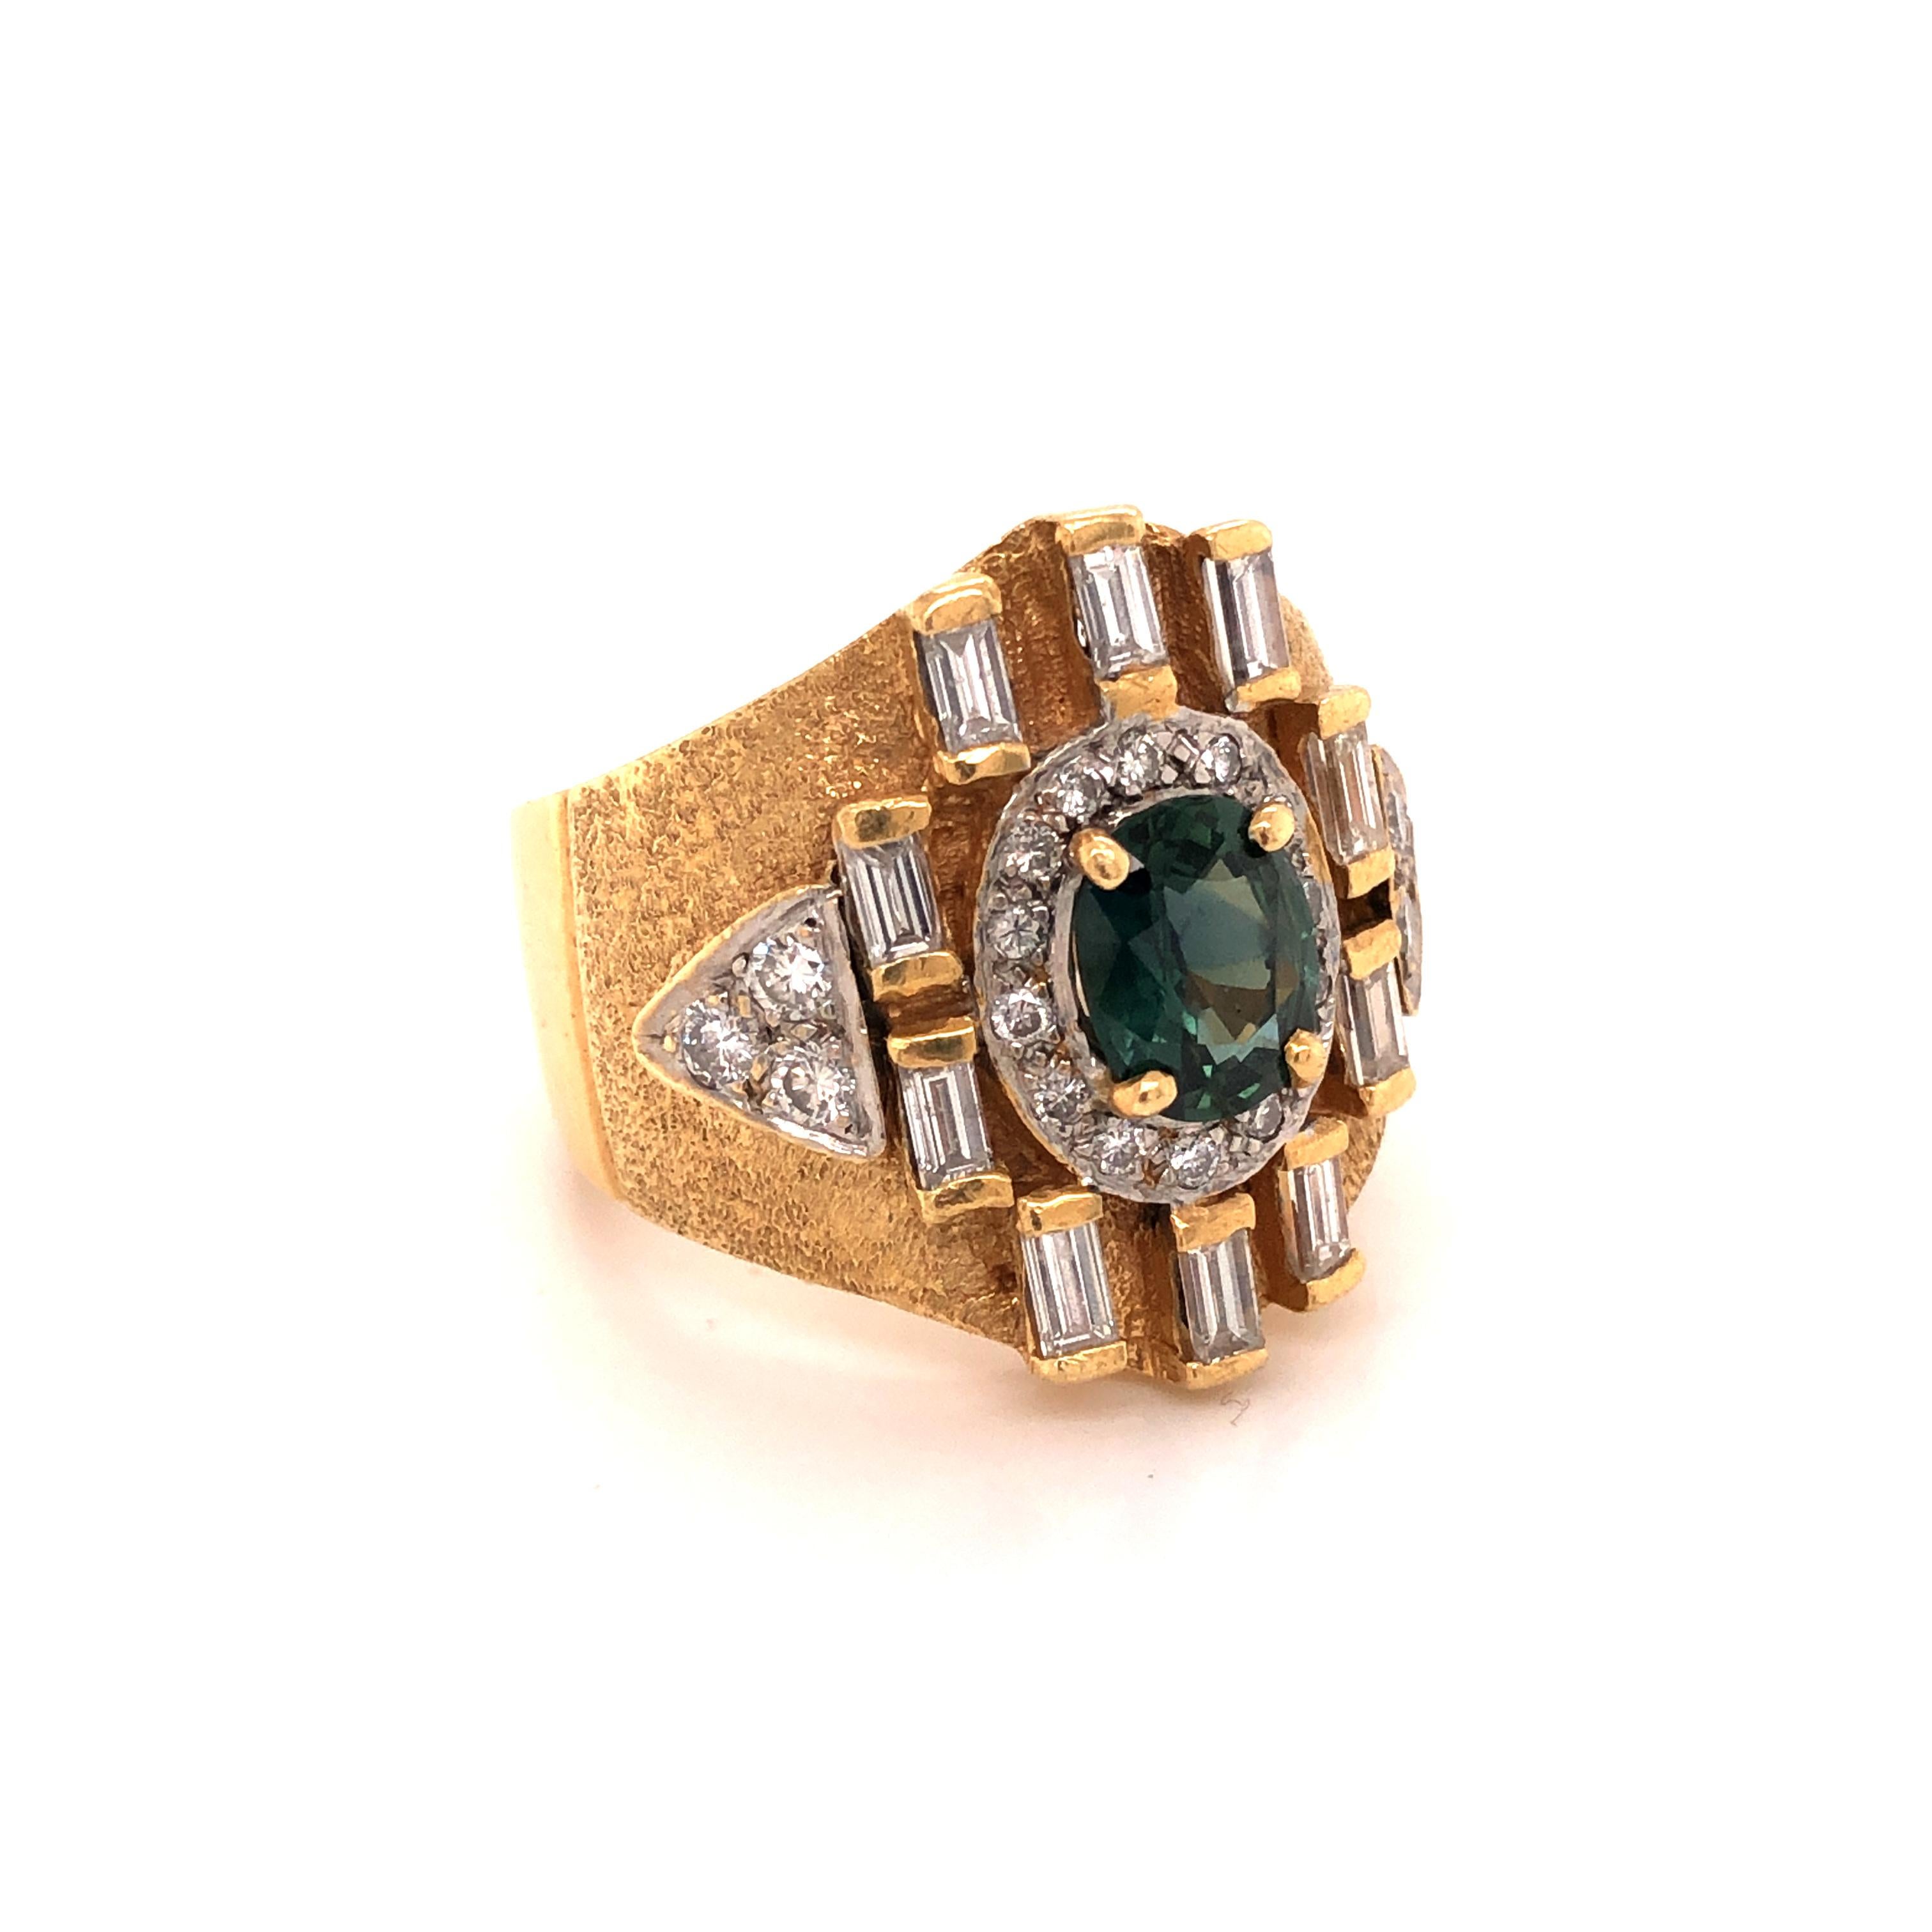 A 14K yellow gold ring featuring an oval-shaped bluish-green sapphire measuring 8.70 x 7.07 x 3.61 mm and weighing approximately 1.75 carats, enhanced by round-cut diamonds weighing a total of 0.55 carat and baguette-cut diamonds weighing a total of